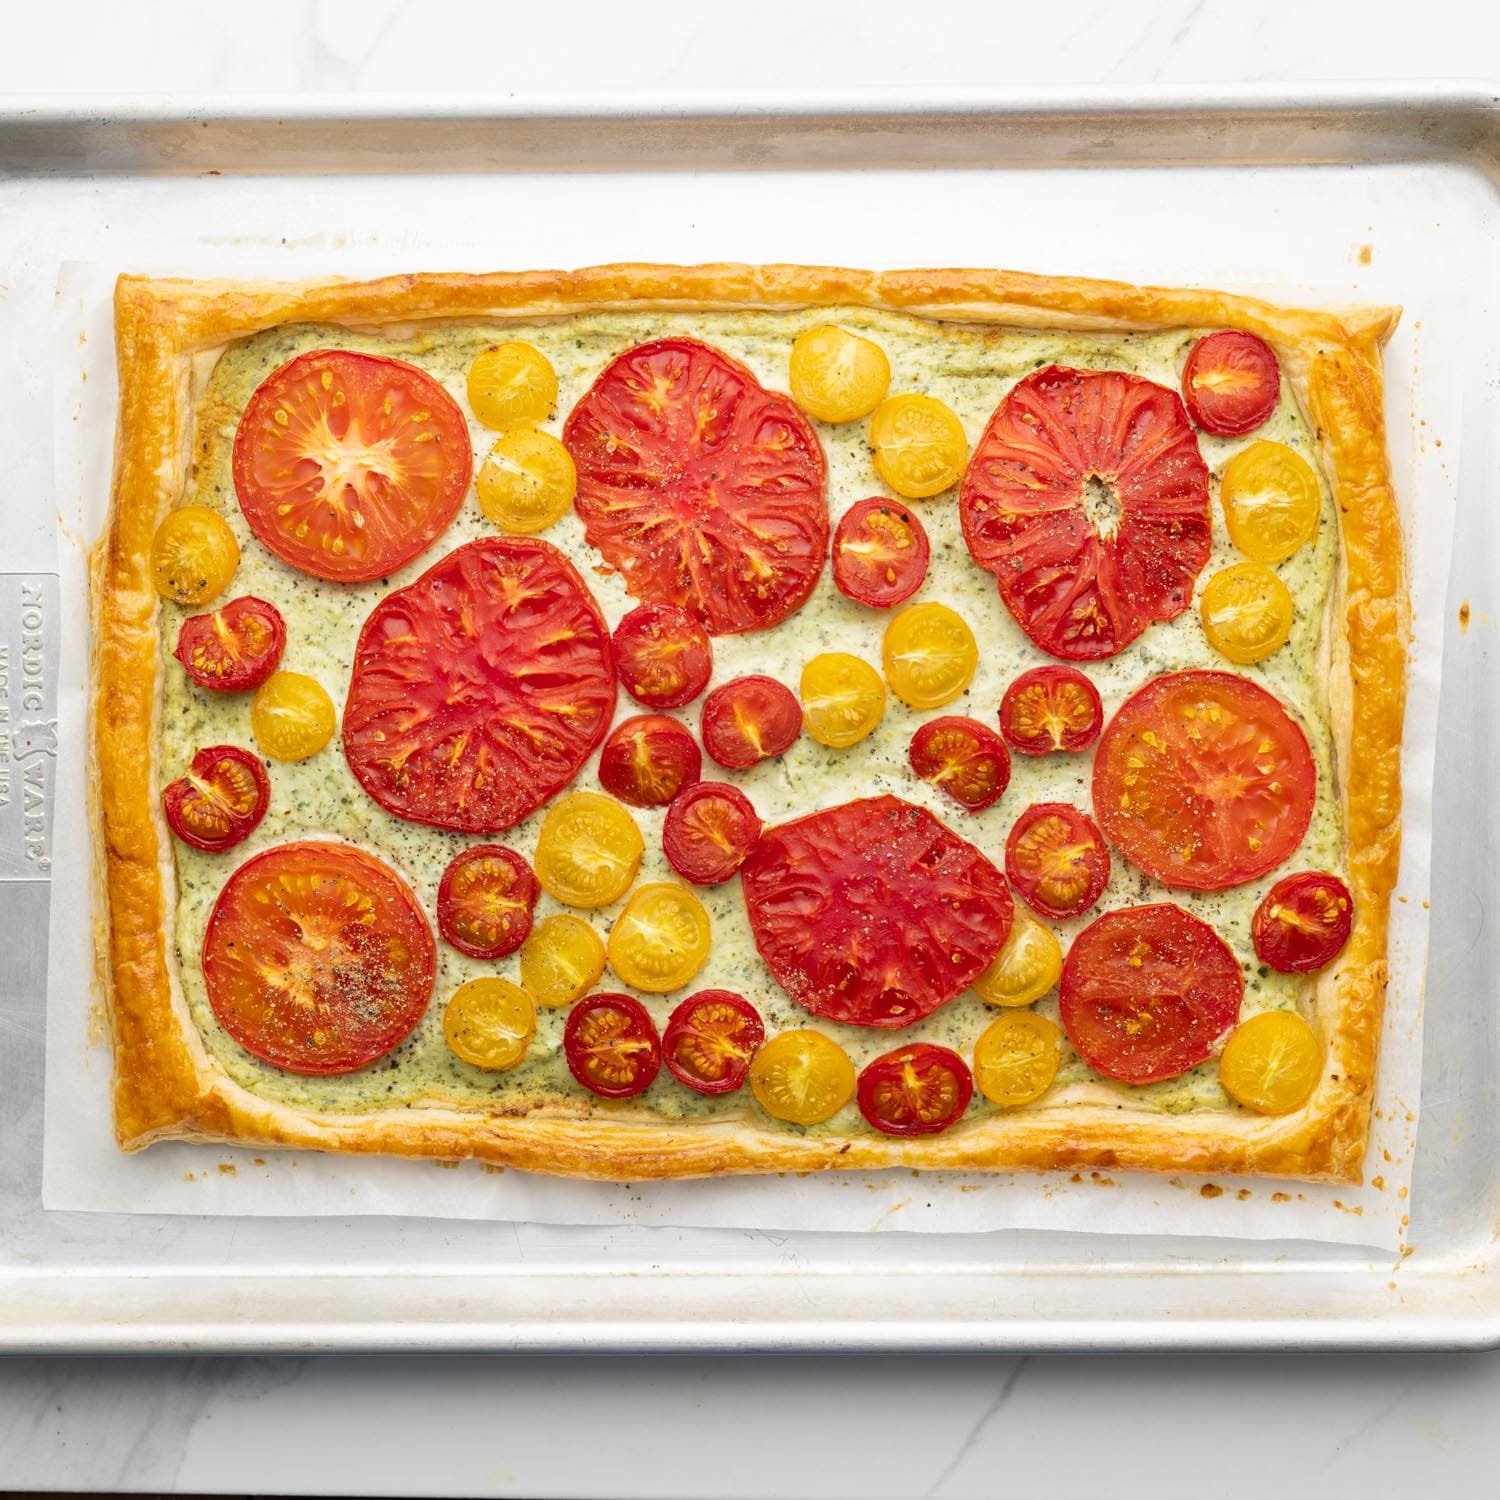 a fresh tomato tart that has been baked on a sheet pan.